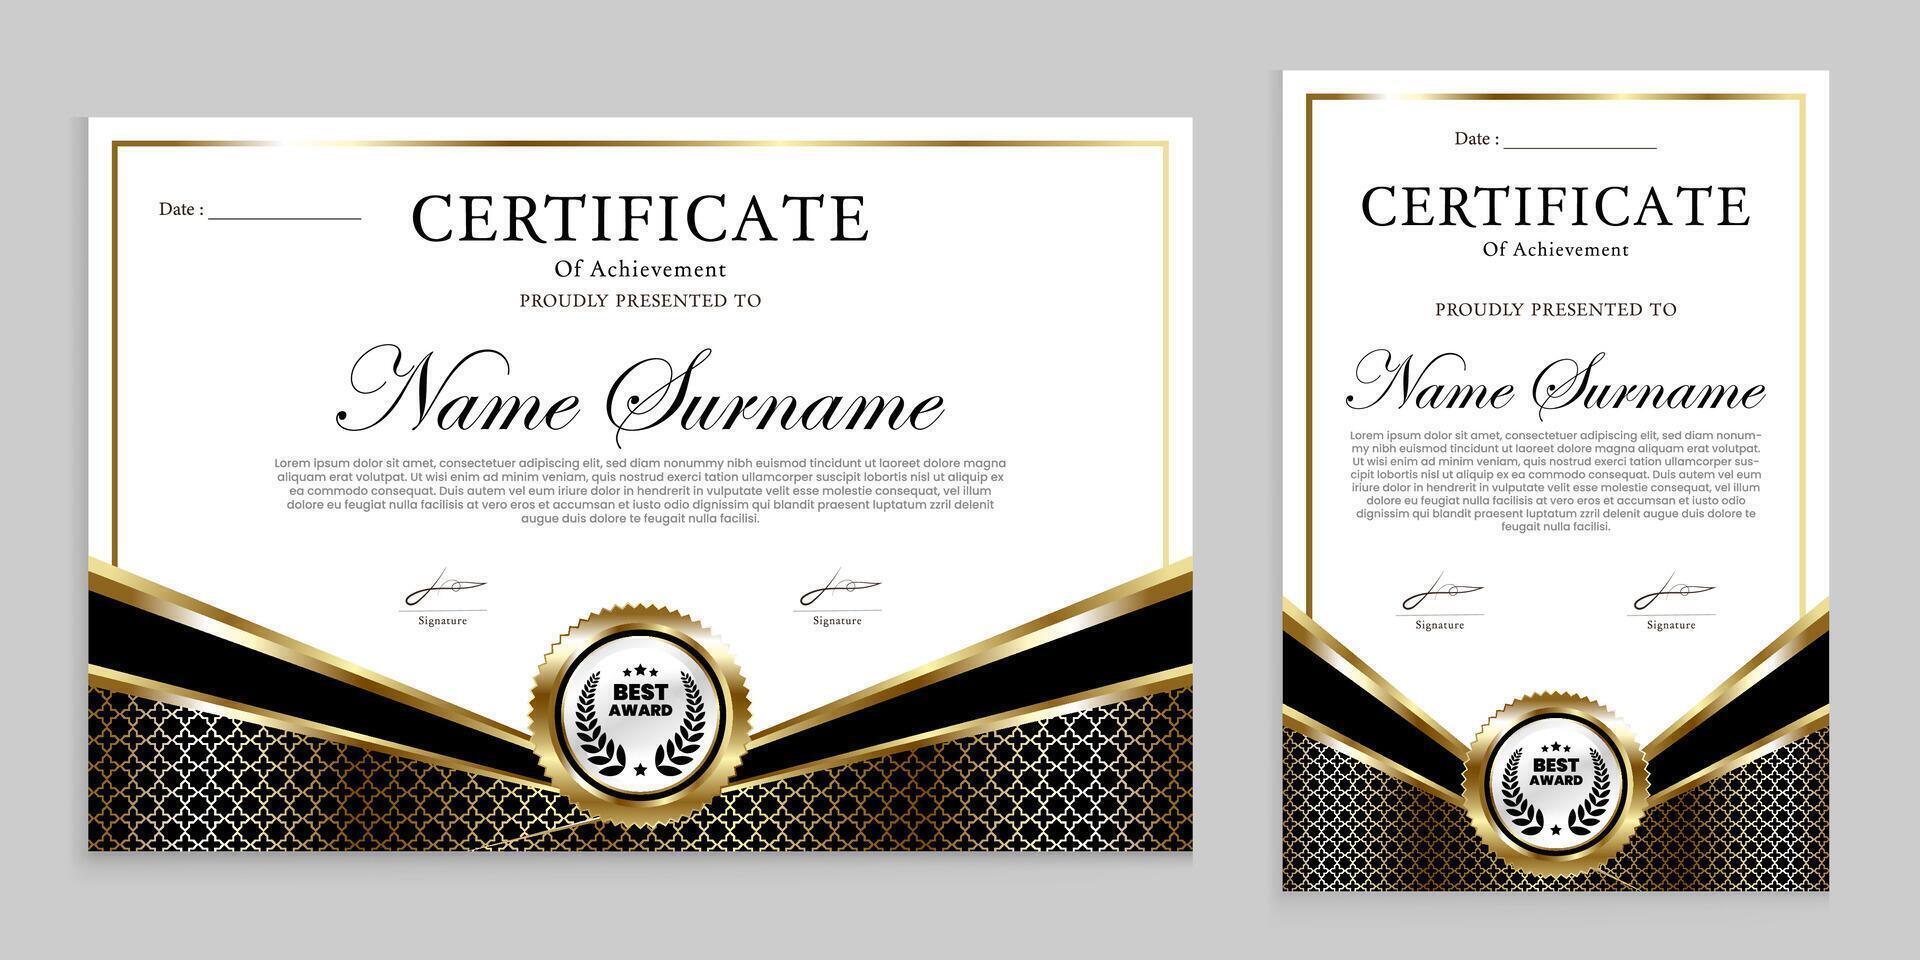 Award, assessment, achievement certificate template. for multipurpose event use. vector